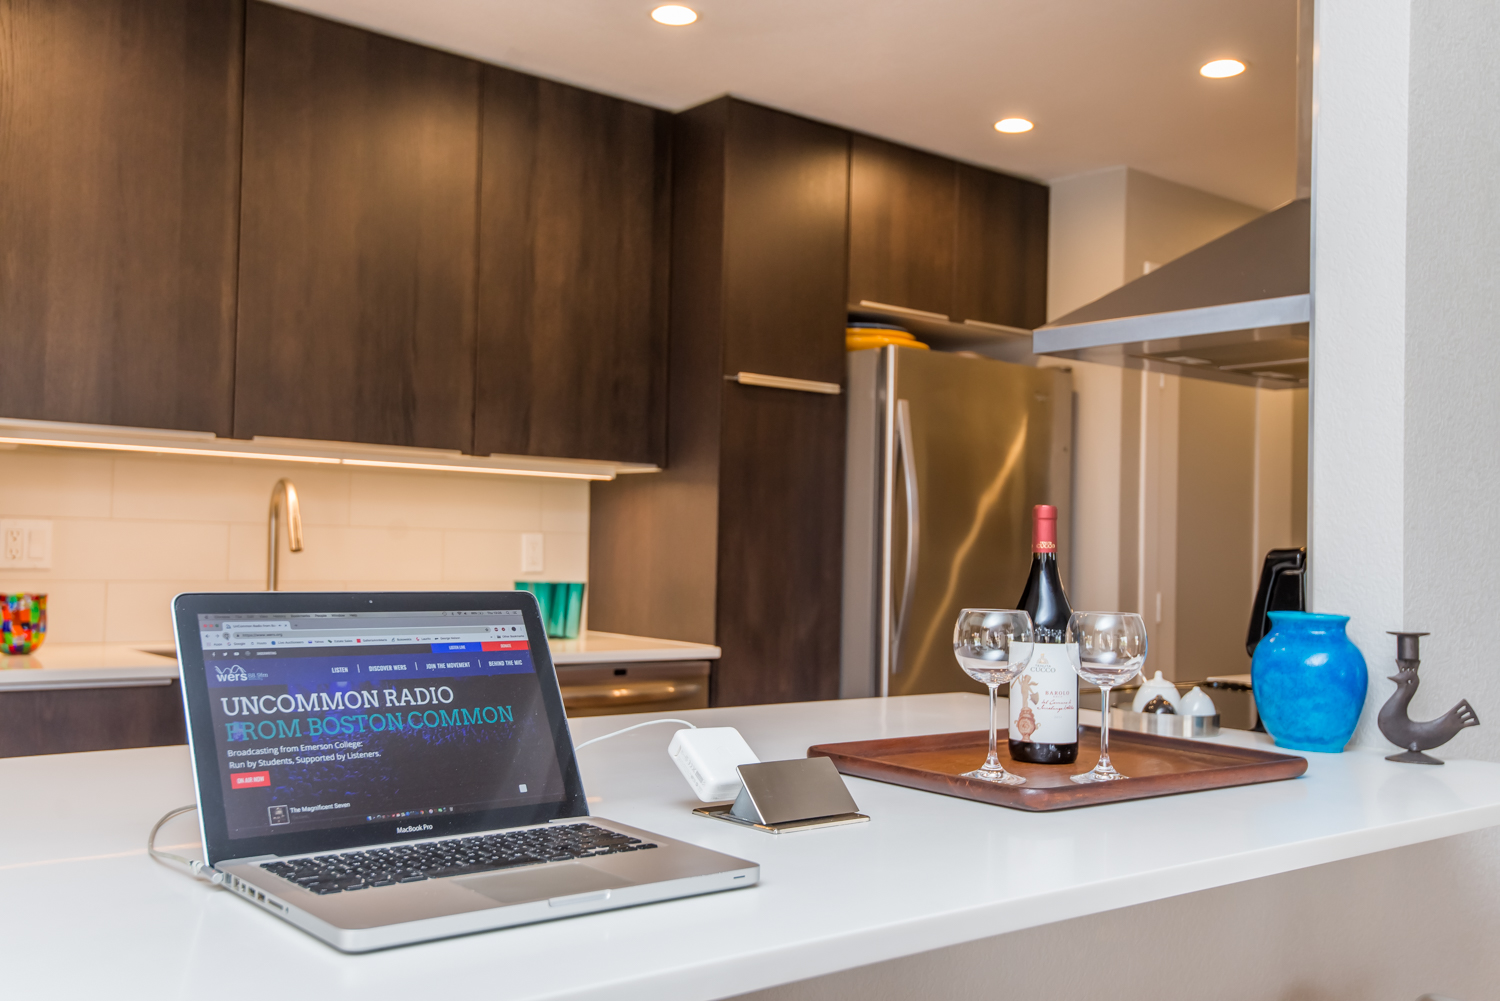 Kitchen bar features a pop-up outlet for laptops or phone charging.